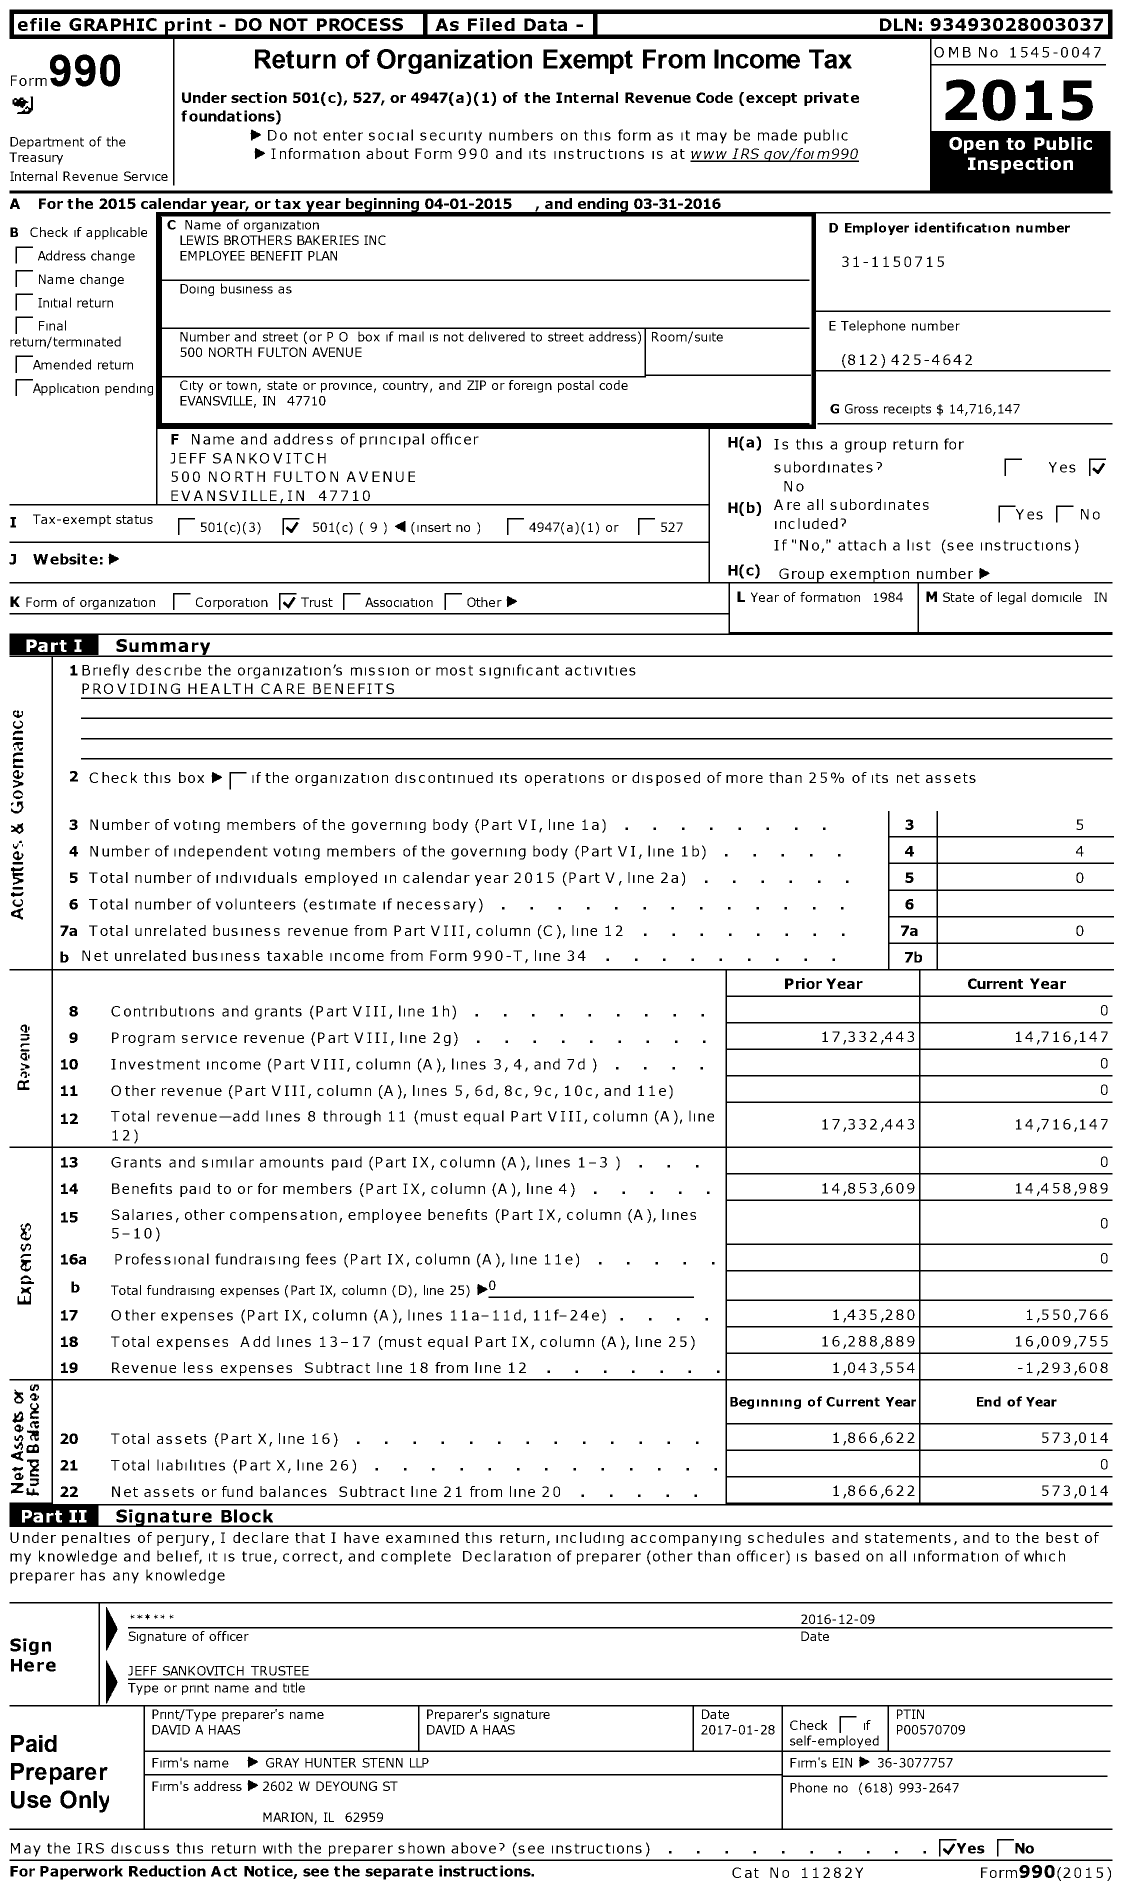 Image of first page of 2015 Form 990O for Lewis Brothers Bakeries Employee Benefit Plan